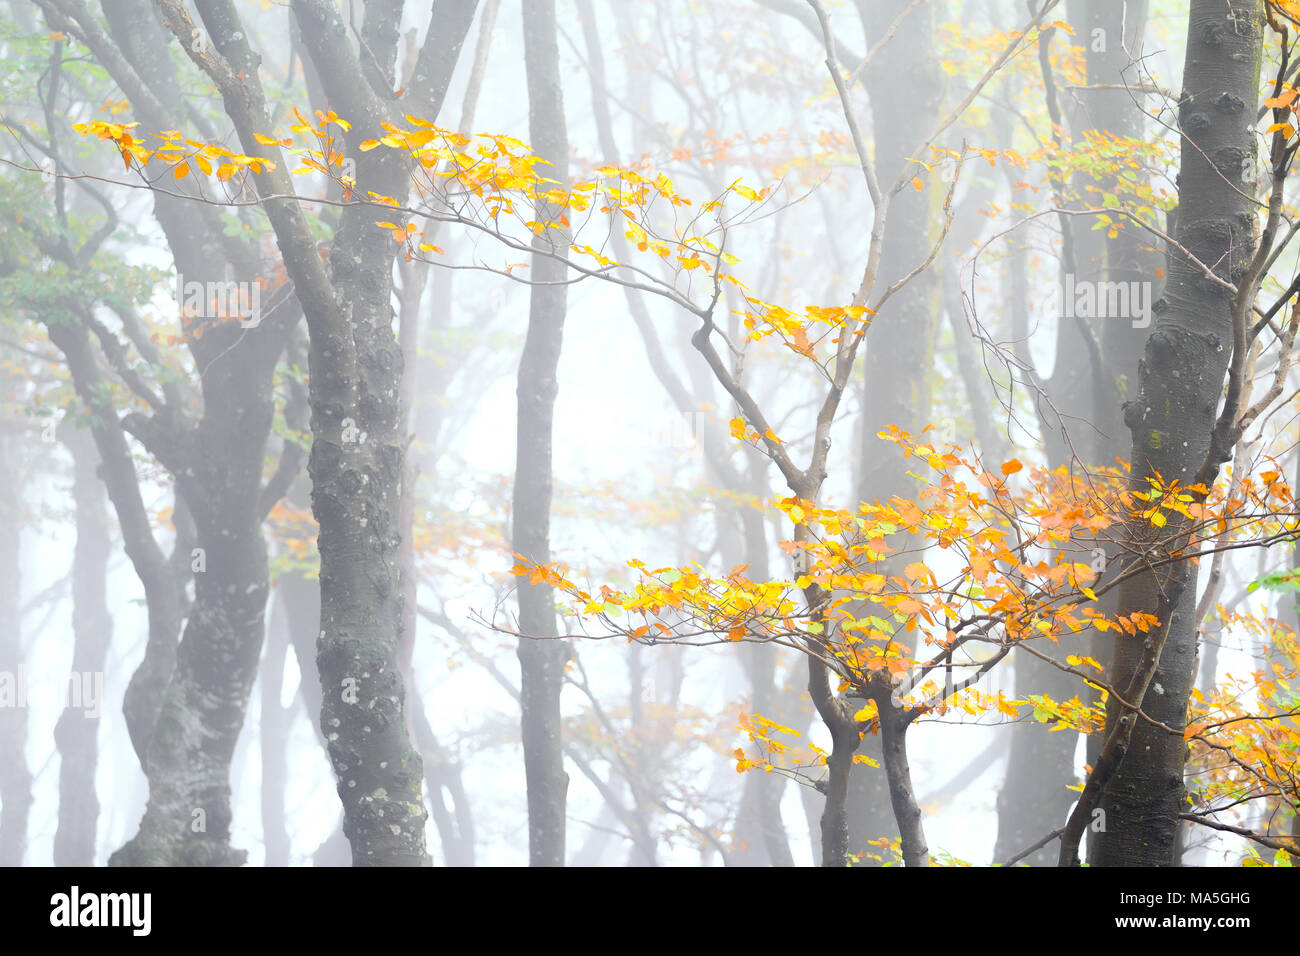 Branch of a tree with leaves in autumn garment during a foggy day. Montemezzo, Como Lake, Lombardy. Italy. Stock Photo